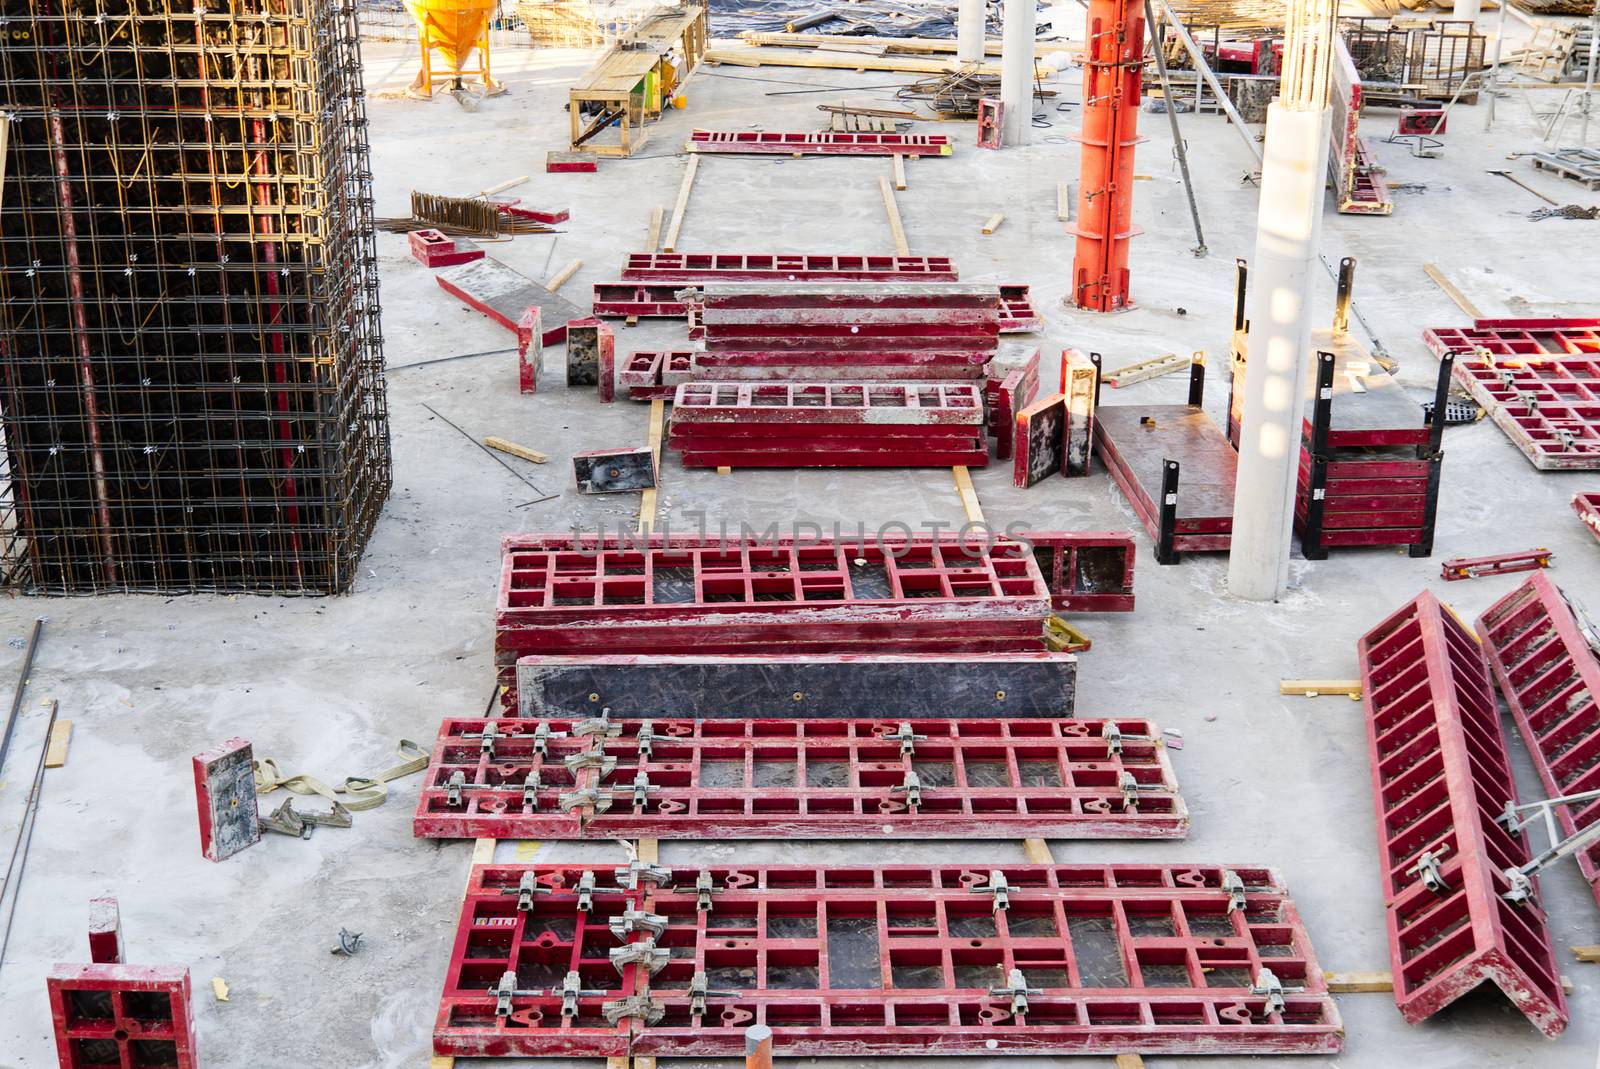 concrete construction of a commercial building with underground parking